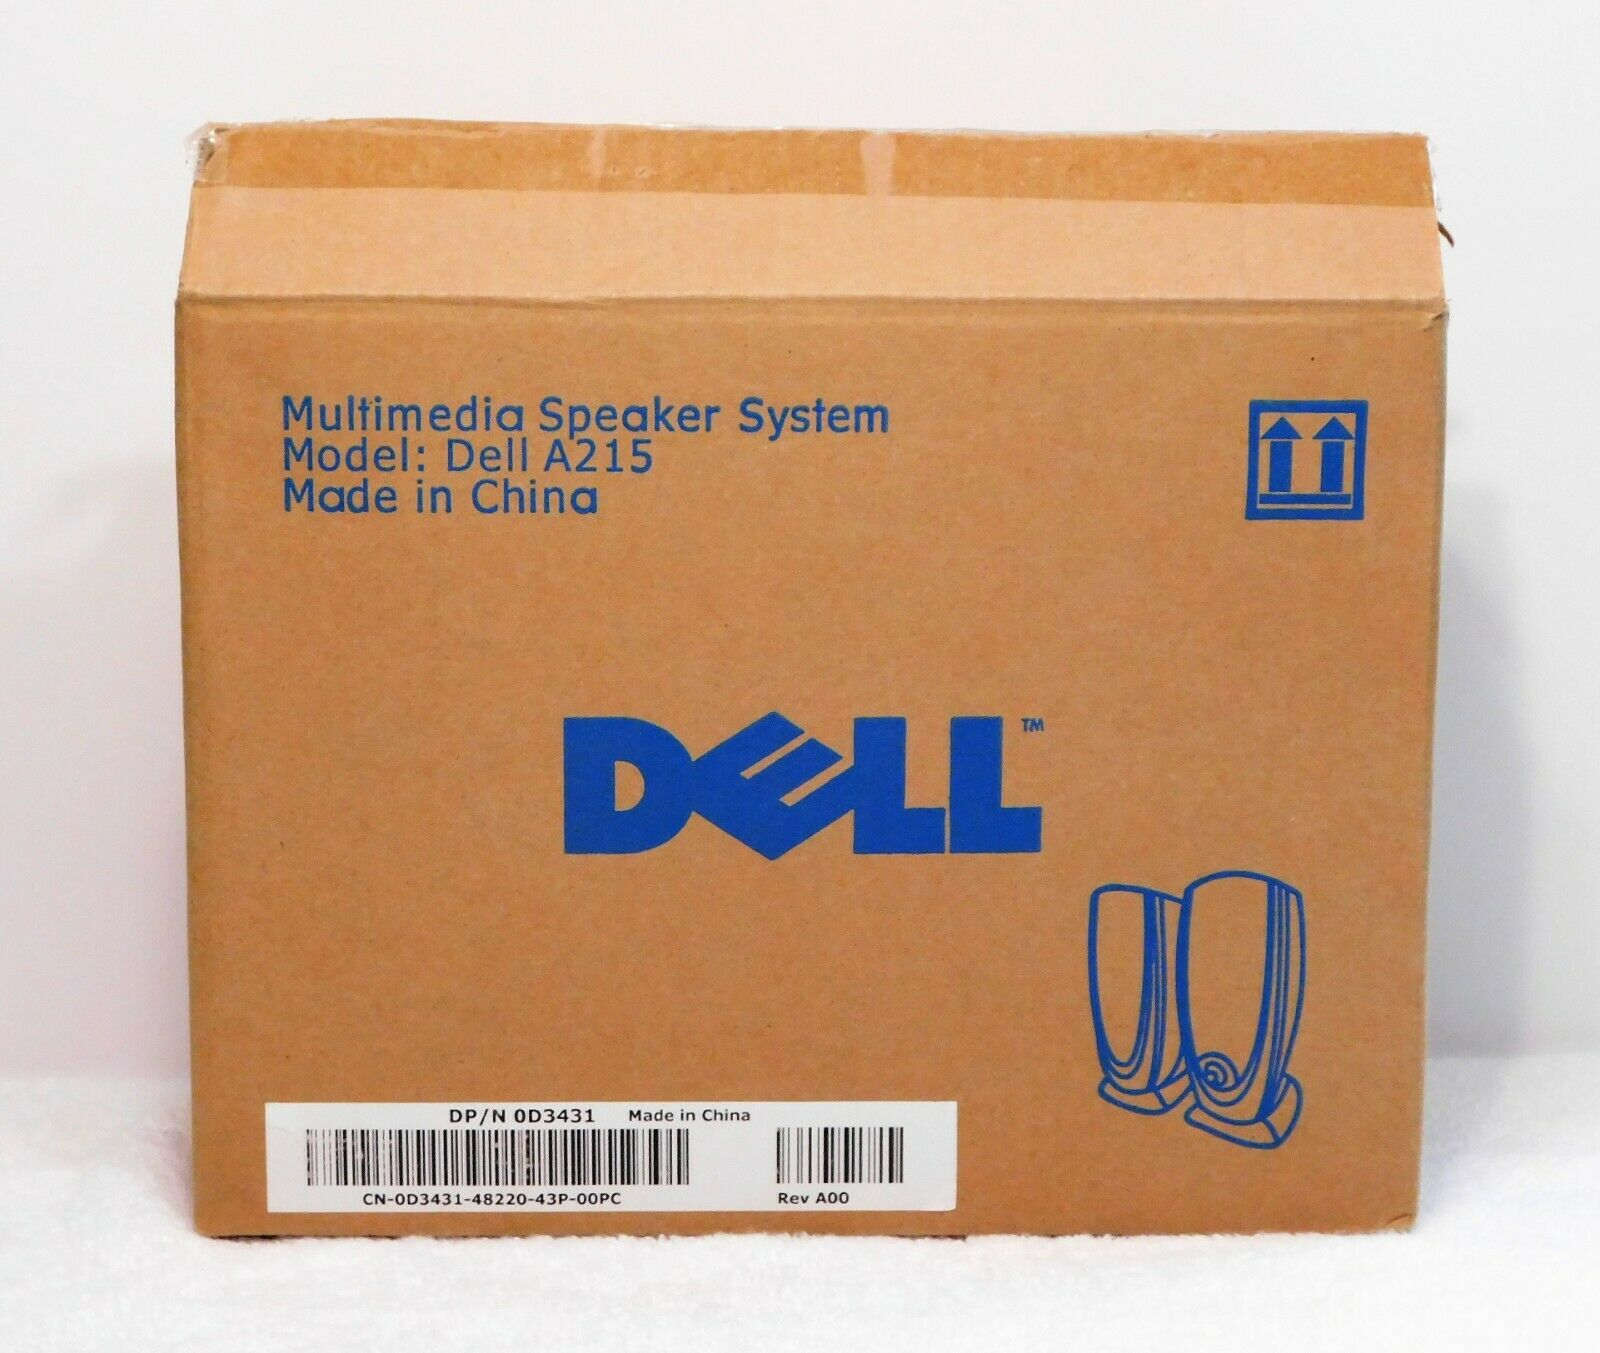 Dell A215 Multimedia Computer Speakers Wired Black & Gray - BRAND NEW, OPEN BOX